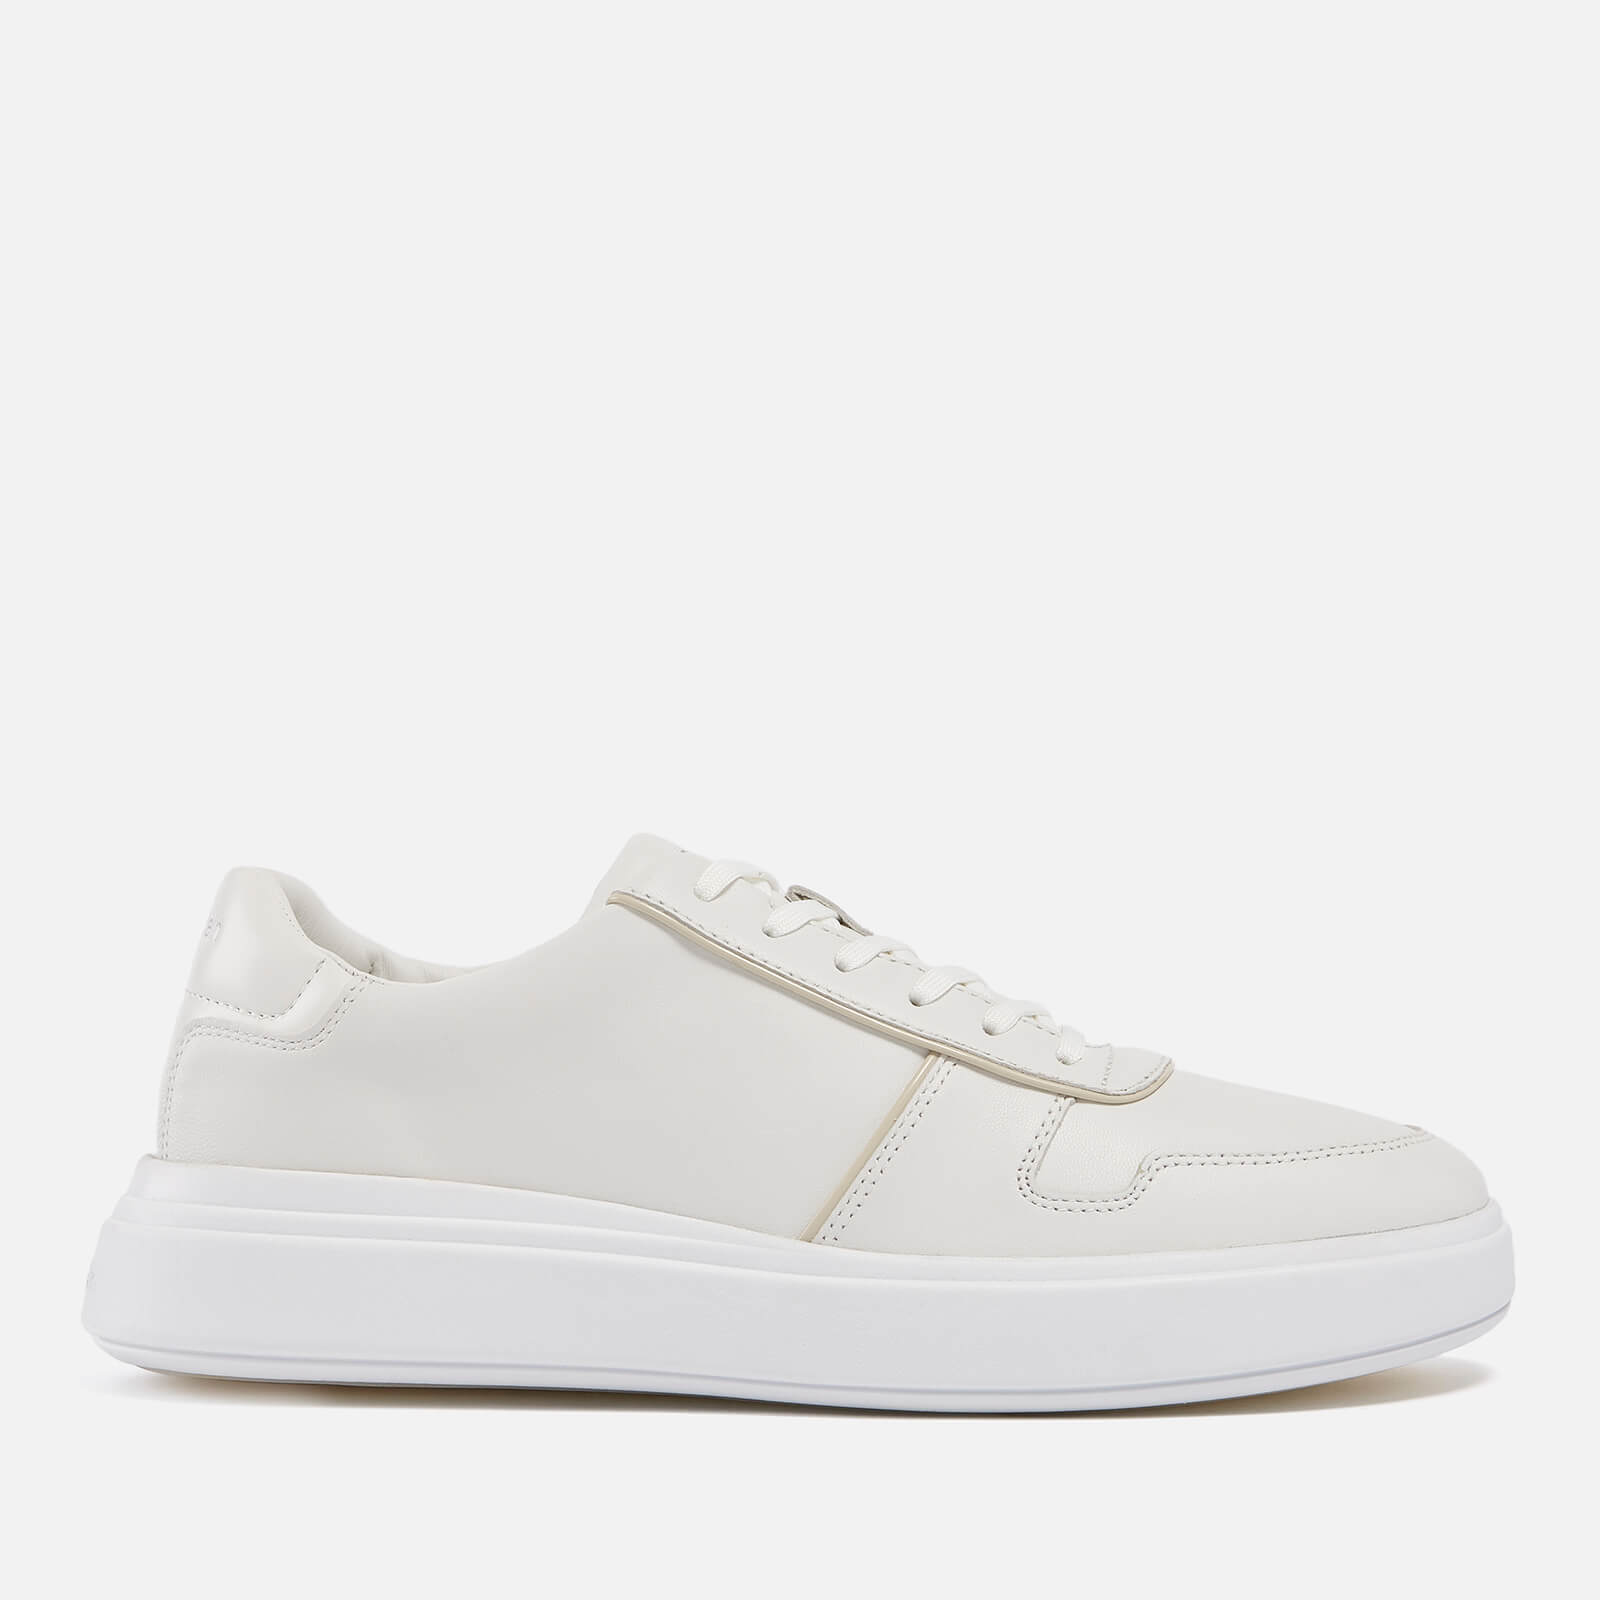 Calvin Klein Men’s Leather Trainers